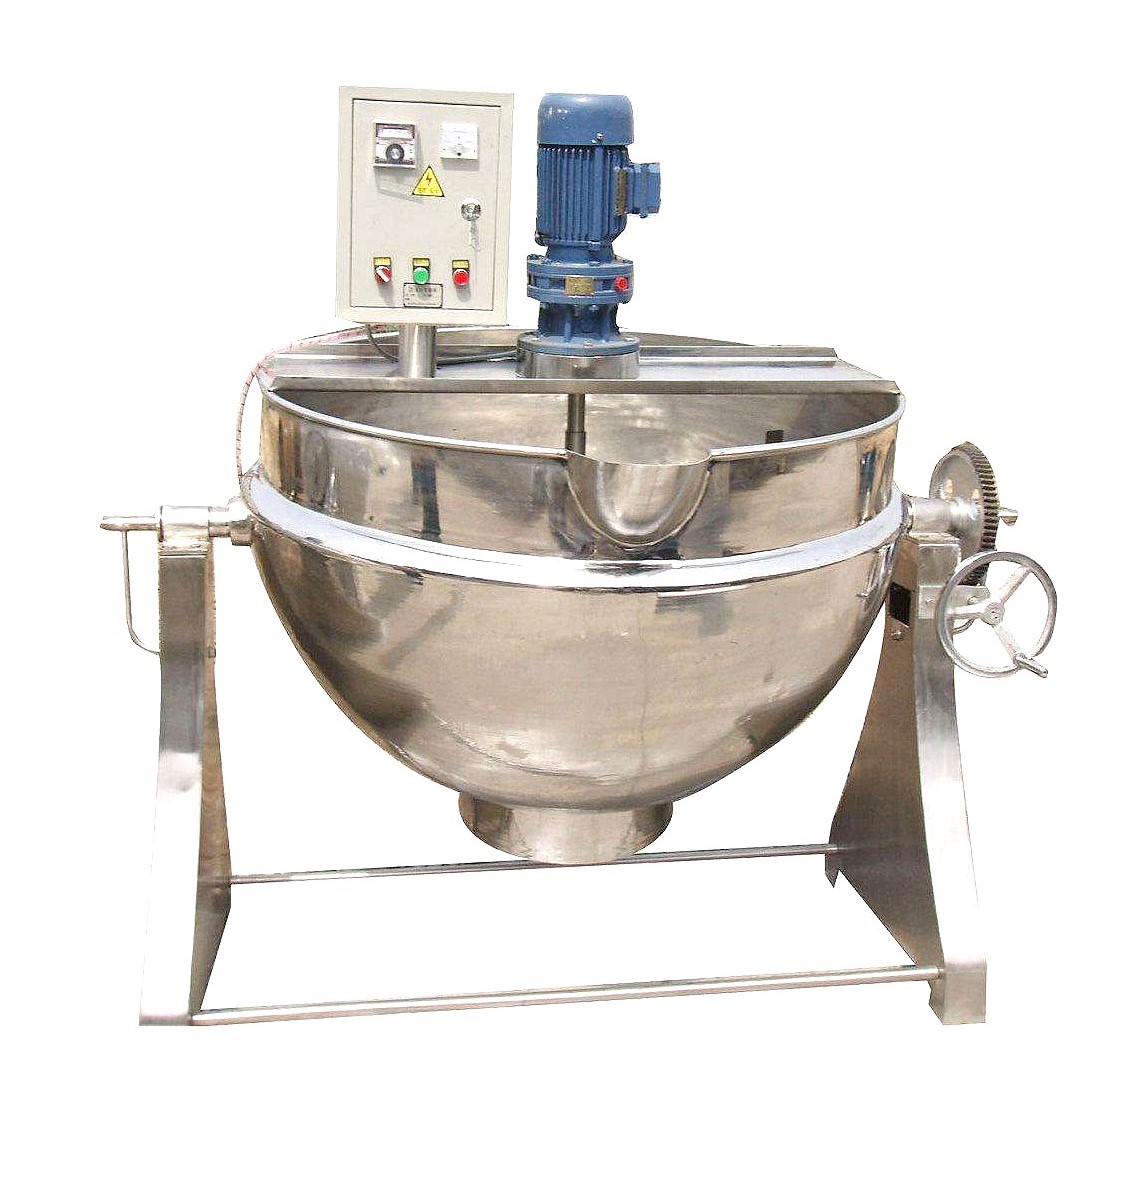 Steam jacketed pot